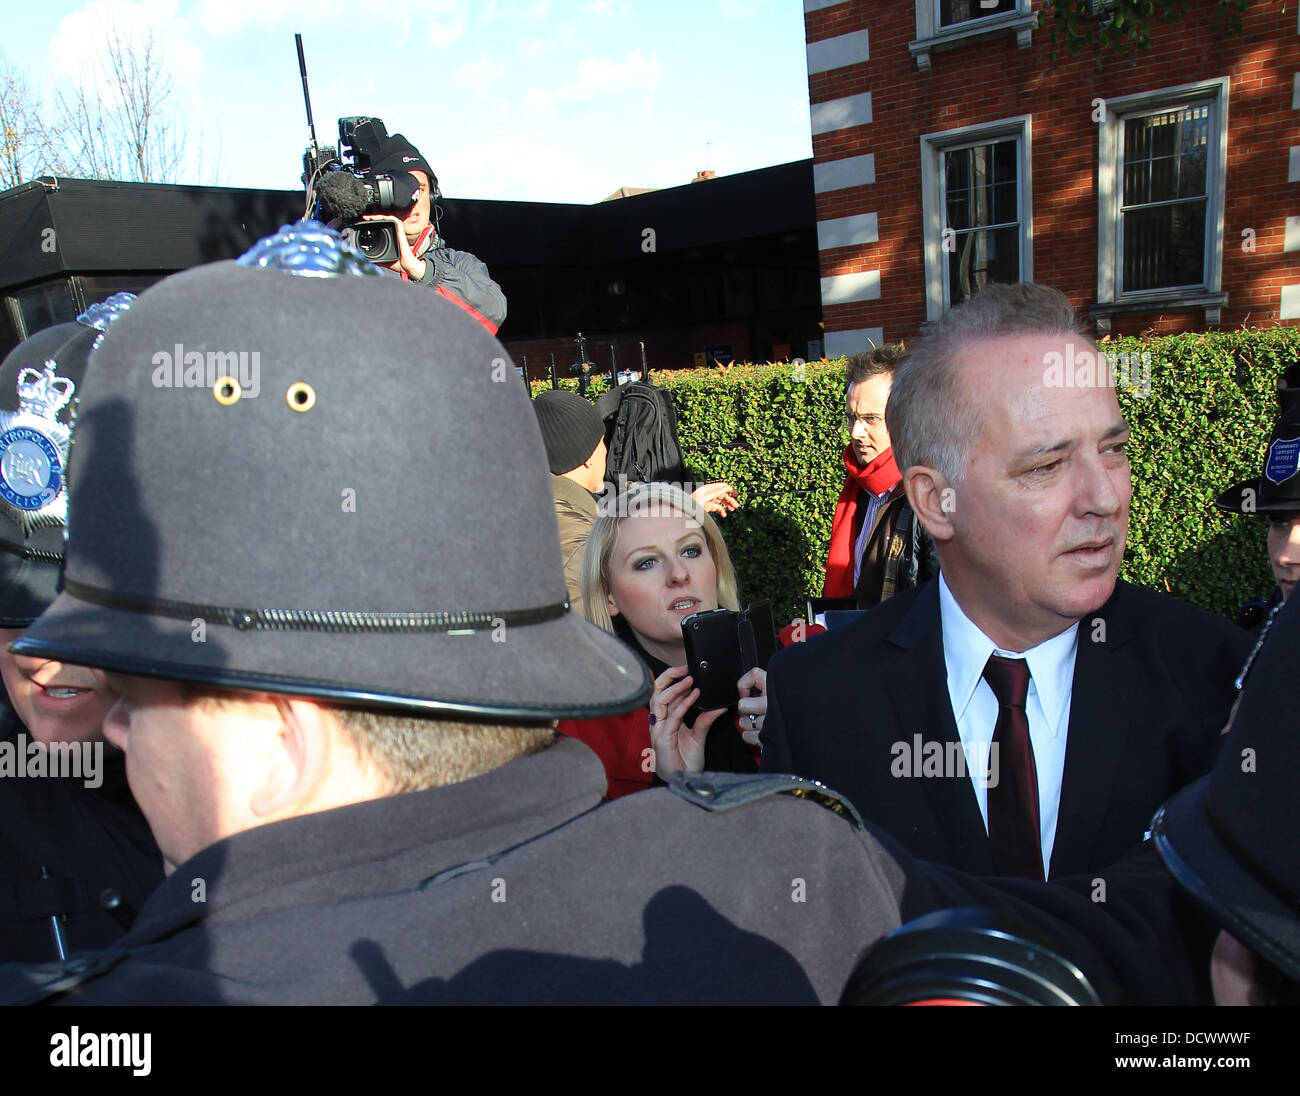 Barrymore fined for drug possession Fallen British entertainer {MICHAEL BARRYMORE} has been fined more than $1,200 (£750) for possessing cocaine. The funnyman, who has battled drink and drug demons in the past, was held by cops last month (Nov11) when the Stock Photo